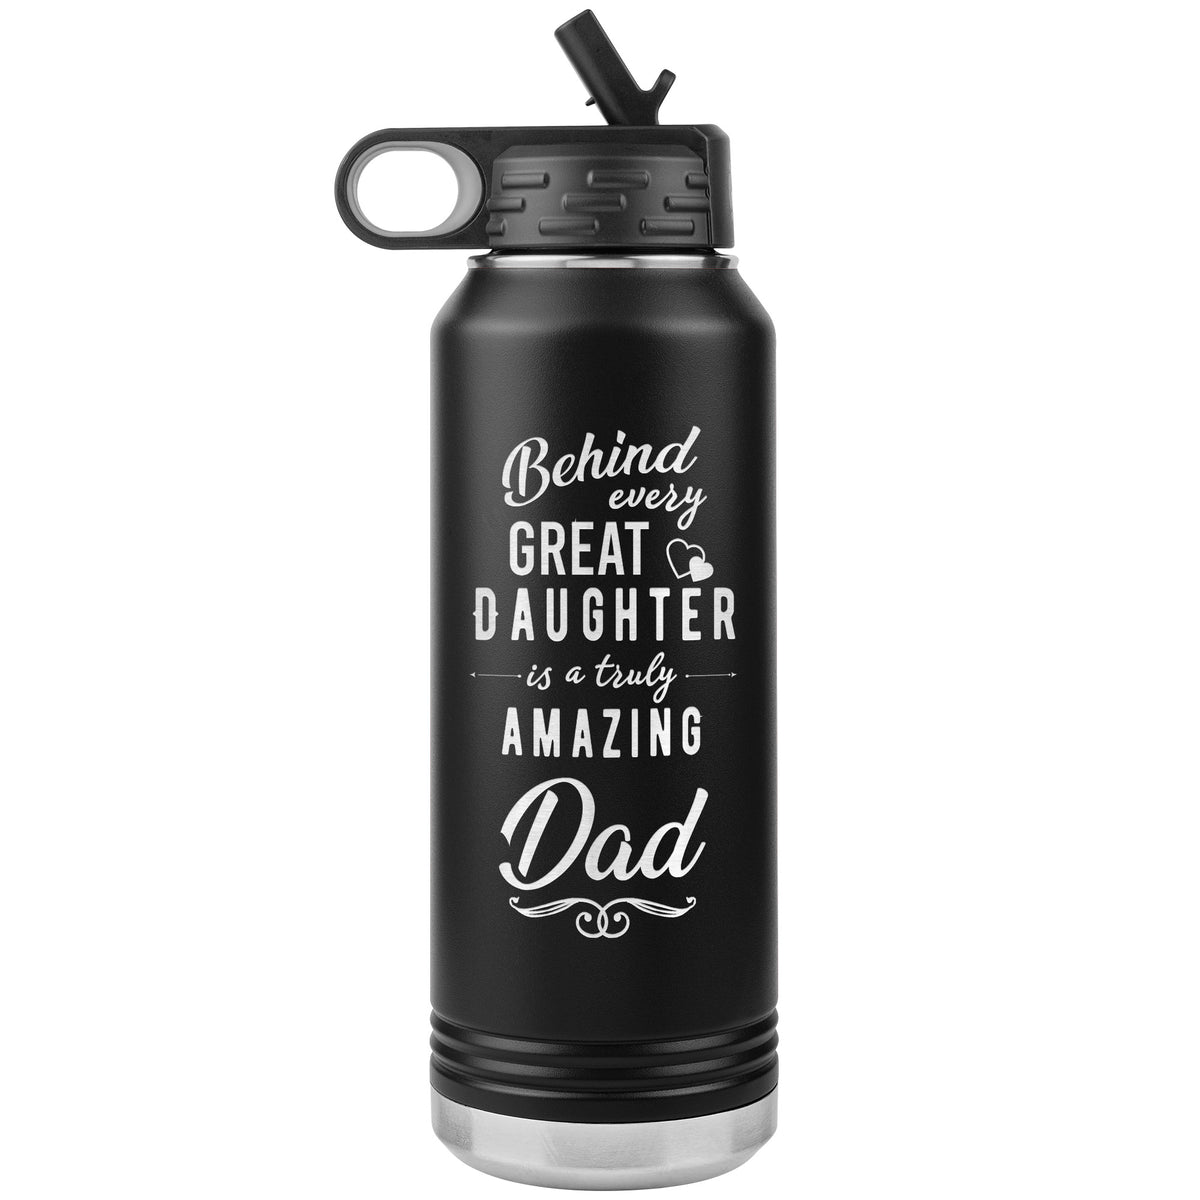 Behind Every Great Daughter is an Amazing Dad Engraved 32oz Insulated Steel Water Bottle